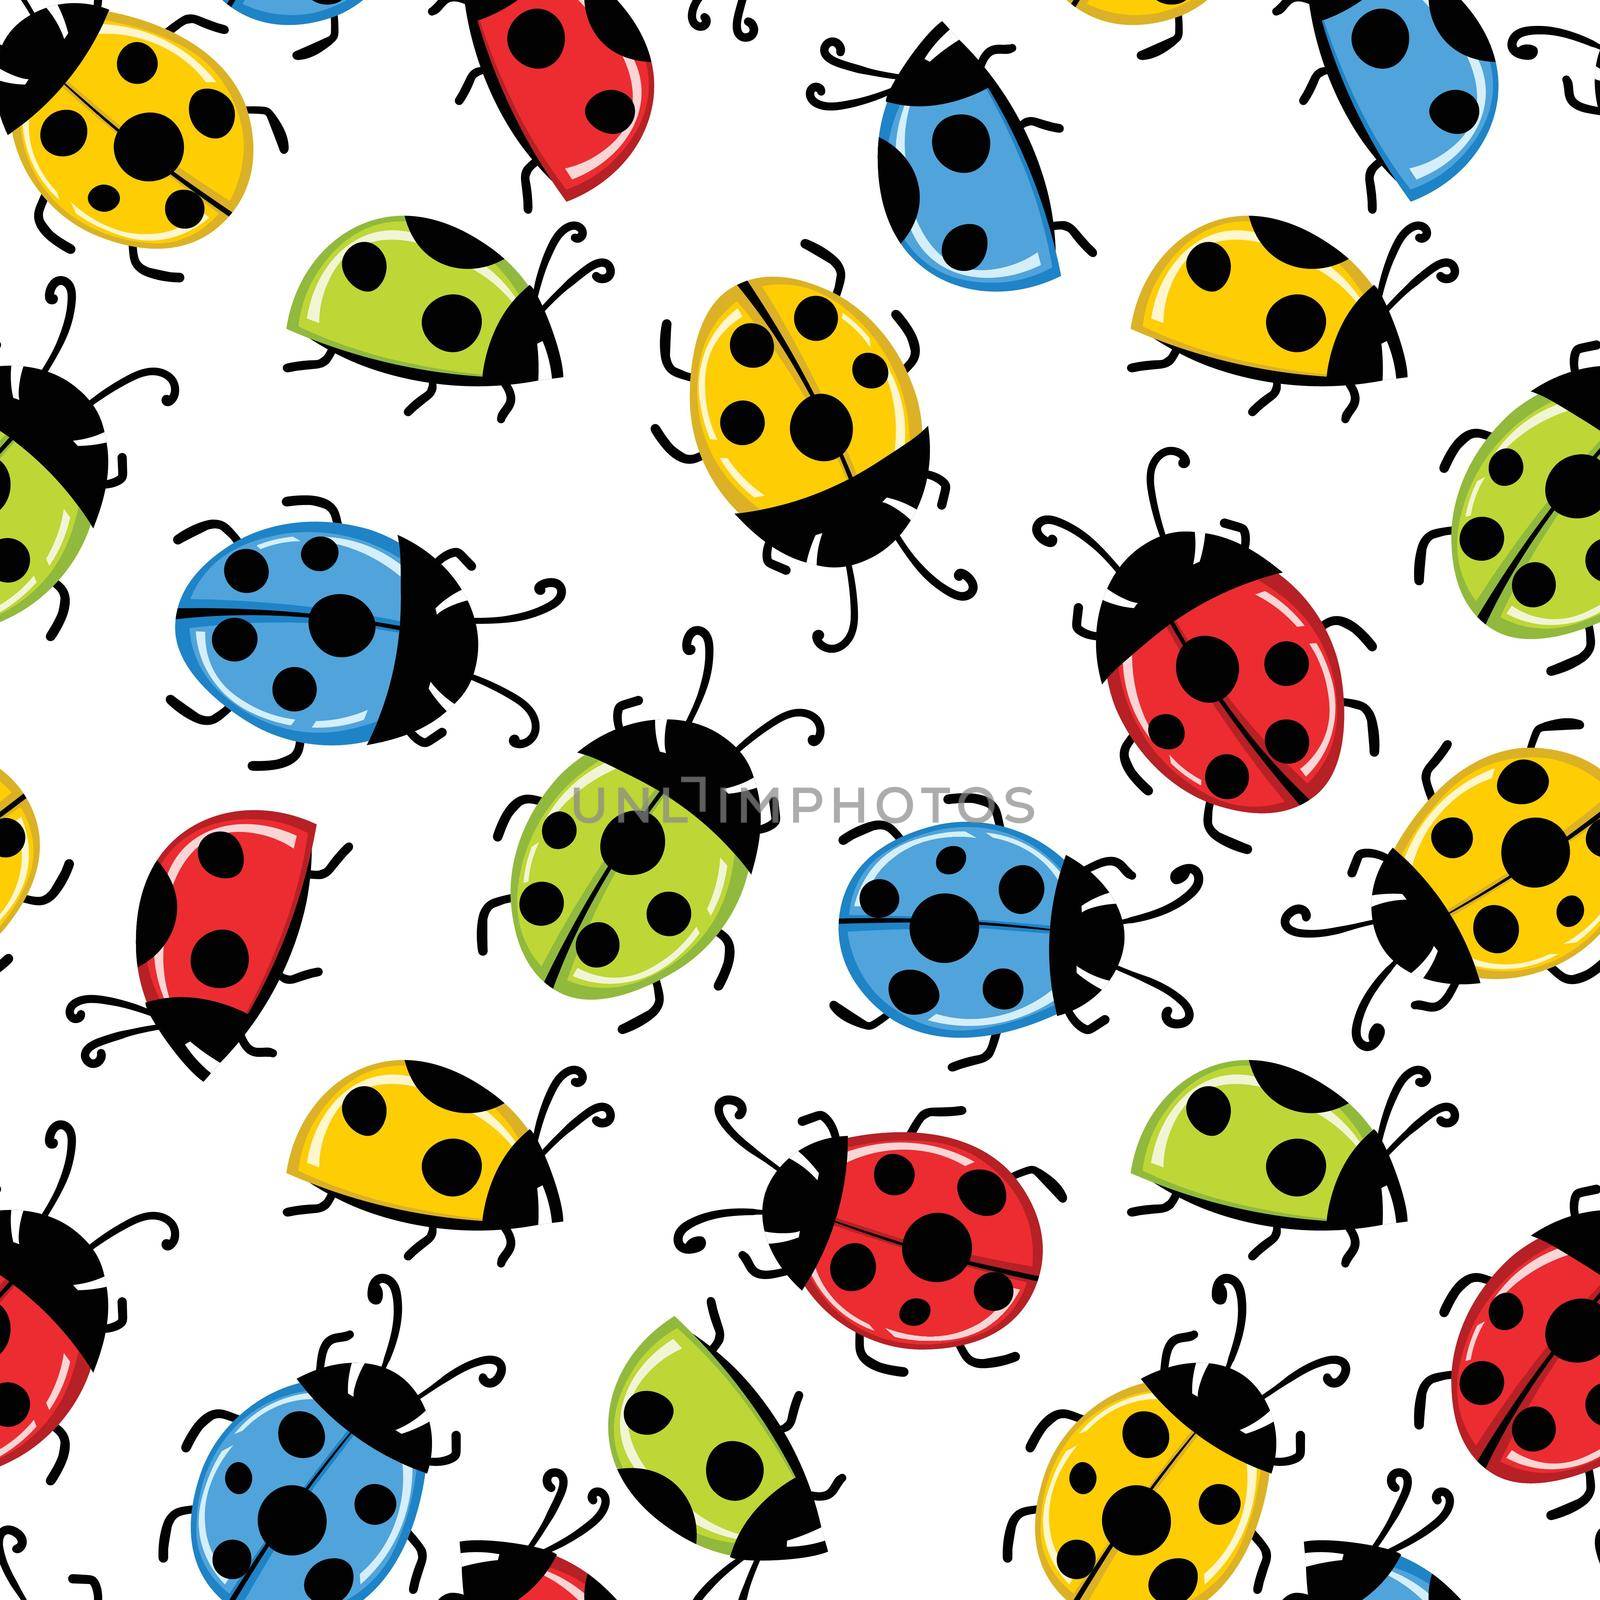 Fashion animal seamless pattern with colorful ladybird on white background. Cute holiday illustration with ladybags for baby. Design for invitation, poster, card, fabric, textile.